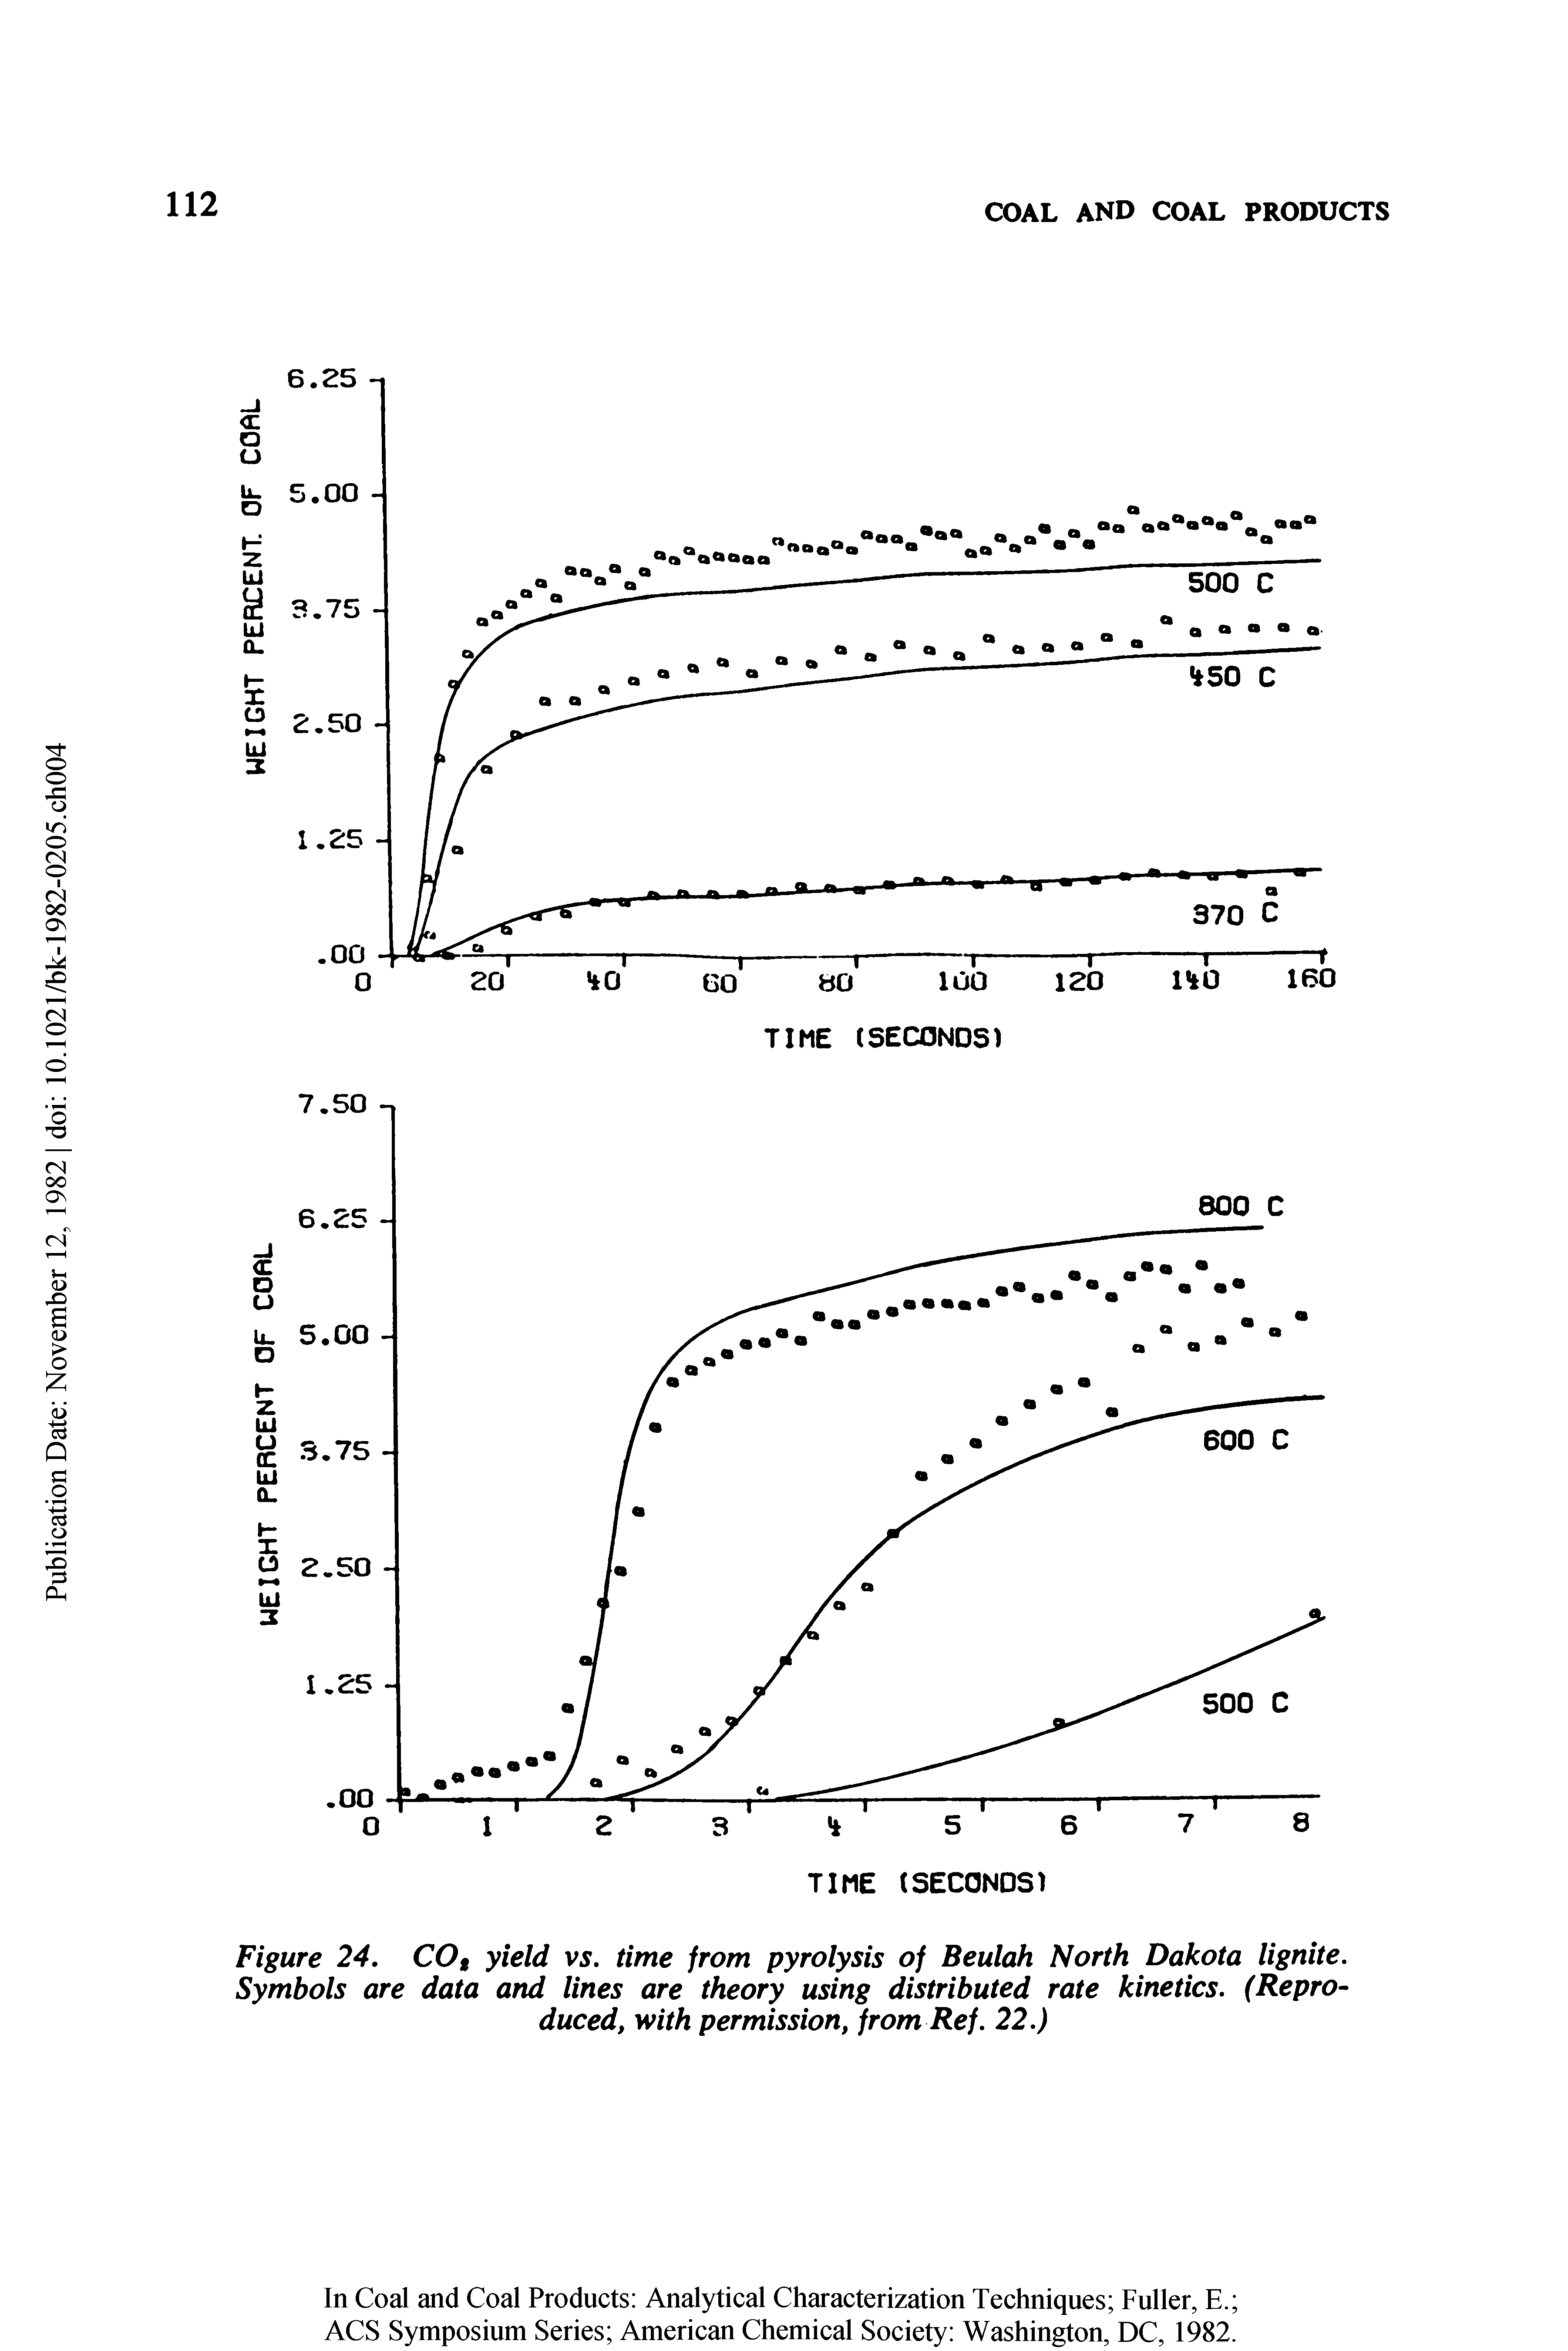 Figure 24, COg yield vs. time from pyrolysis of Beulah North Dakota lignite. Symbols are data and lines are theory using distributed rate kinetics. (Reproduced, with permission, from Ref. 22.)...